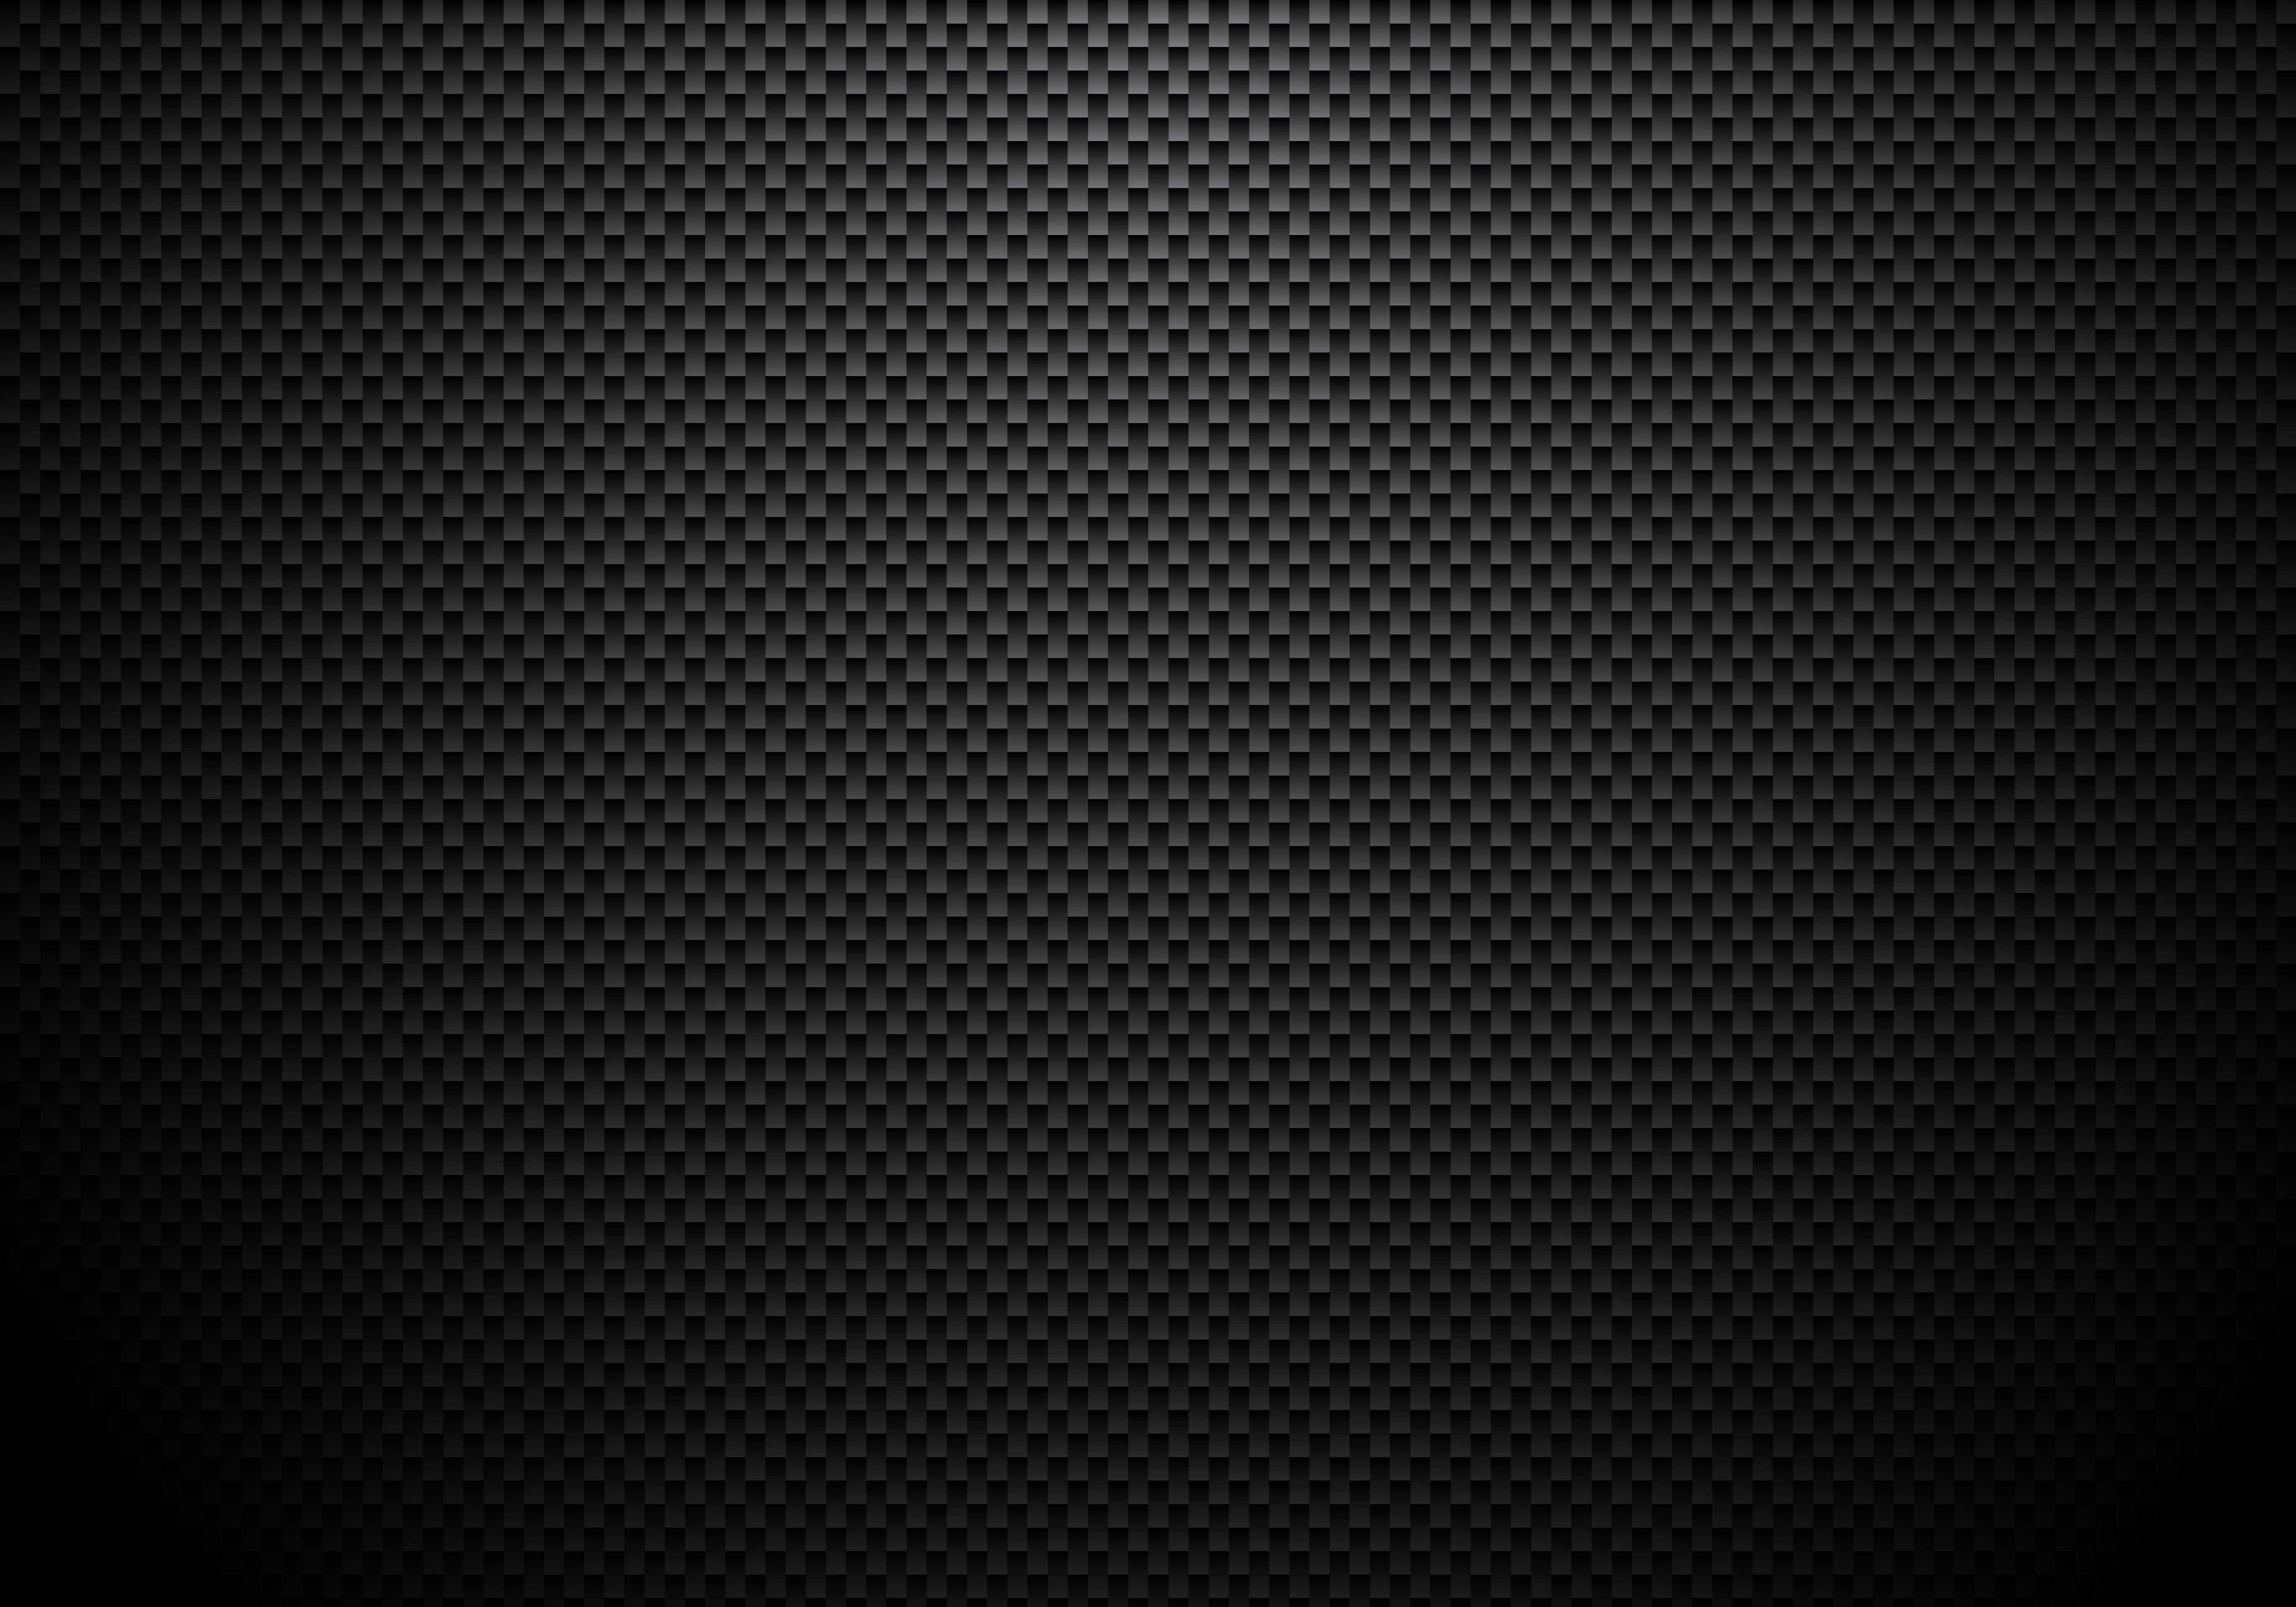 Carbon fiber background and texture with lighting. Material wallpaper for car tuning or service